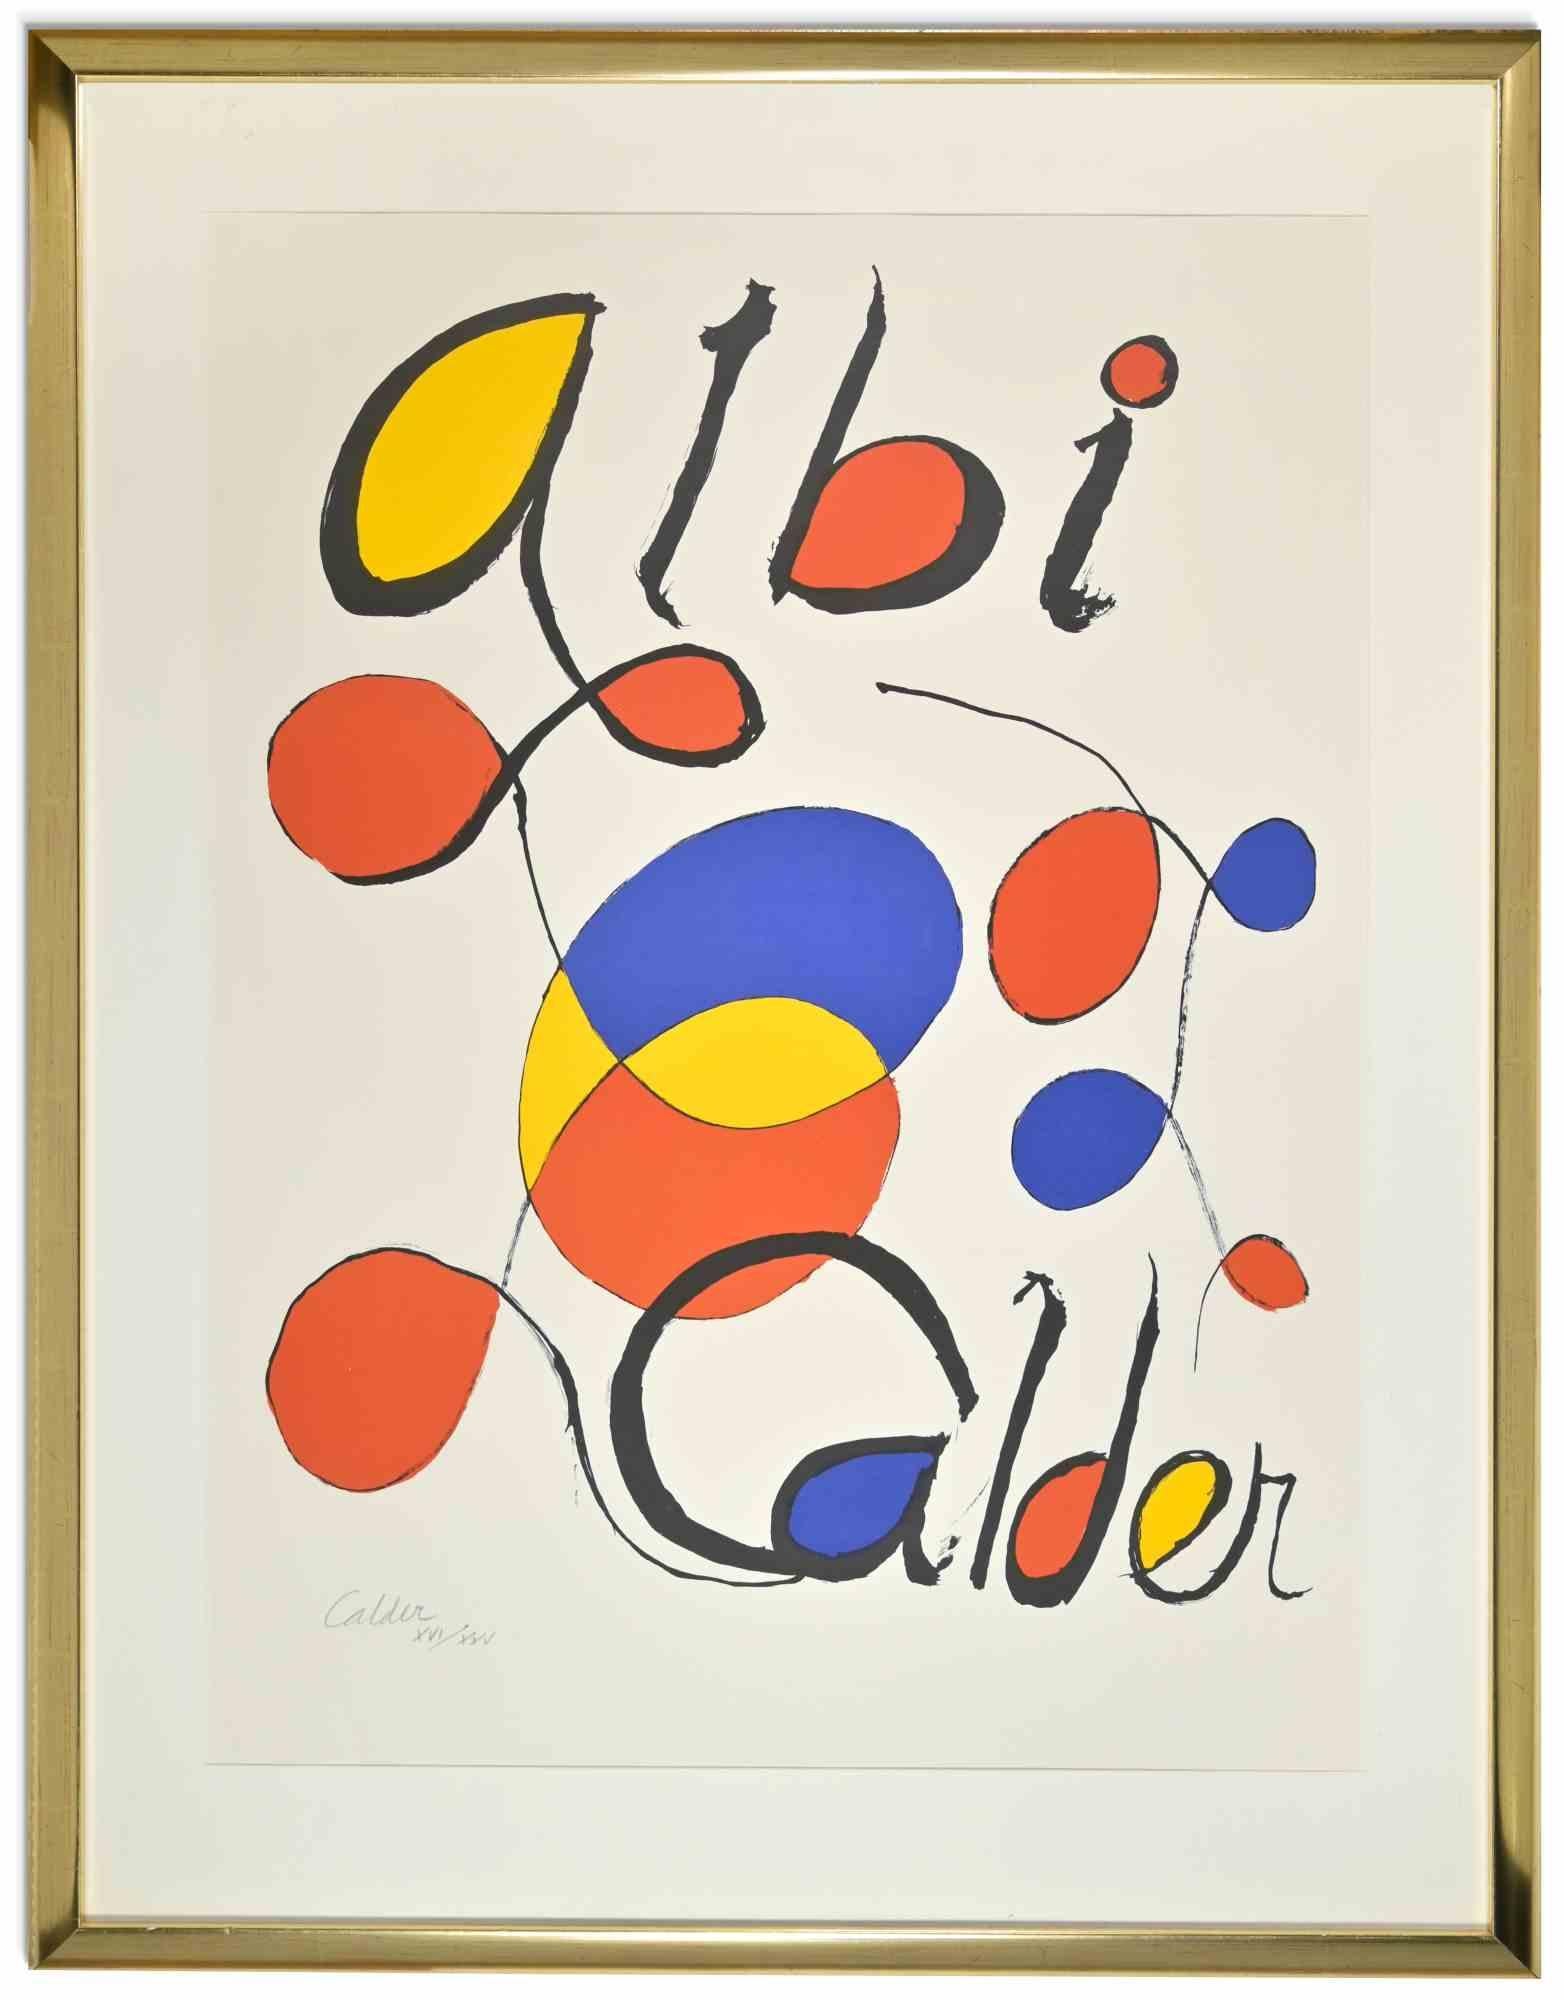 Albi is an artwork realized by Alexander Calder in the learly 1970s. 

Lithograph on Vellum, cm. 82x61.5 (framed 100x82 cm).

Signed in pencil in the lower left 'Calder' and numbered in pencil 'XVI/XXX'.

Framed under glass.

Very good condition.